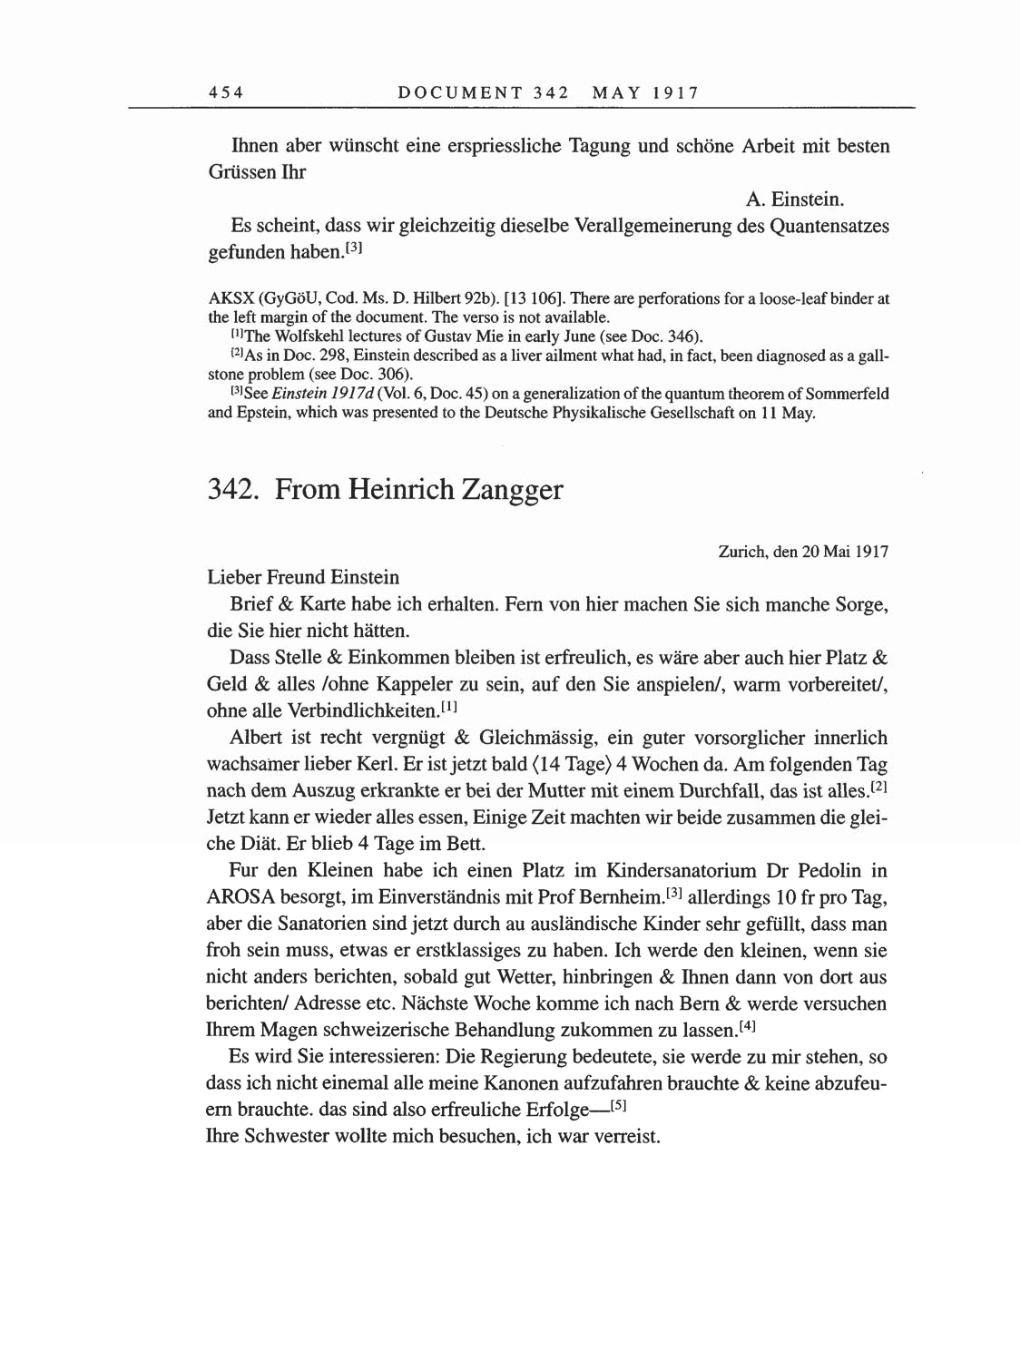 Volume 8, Part A: The Berlin Years: Correspondence 1914-1917 page 454